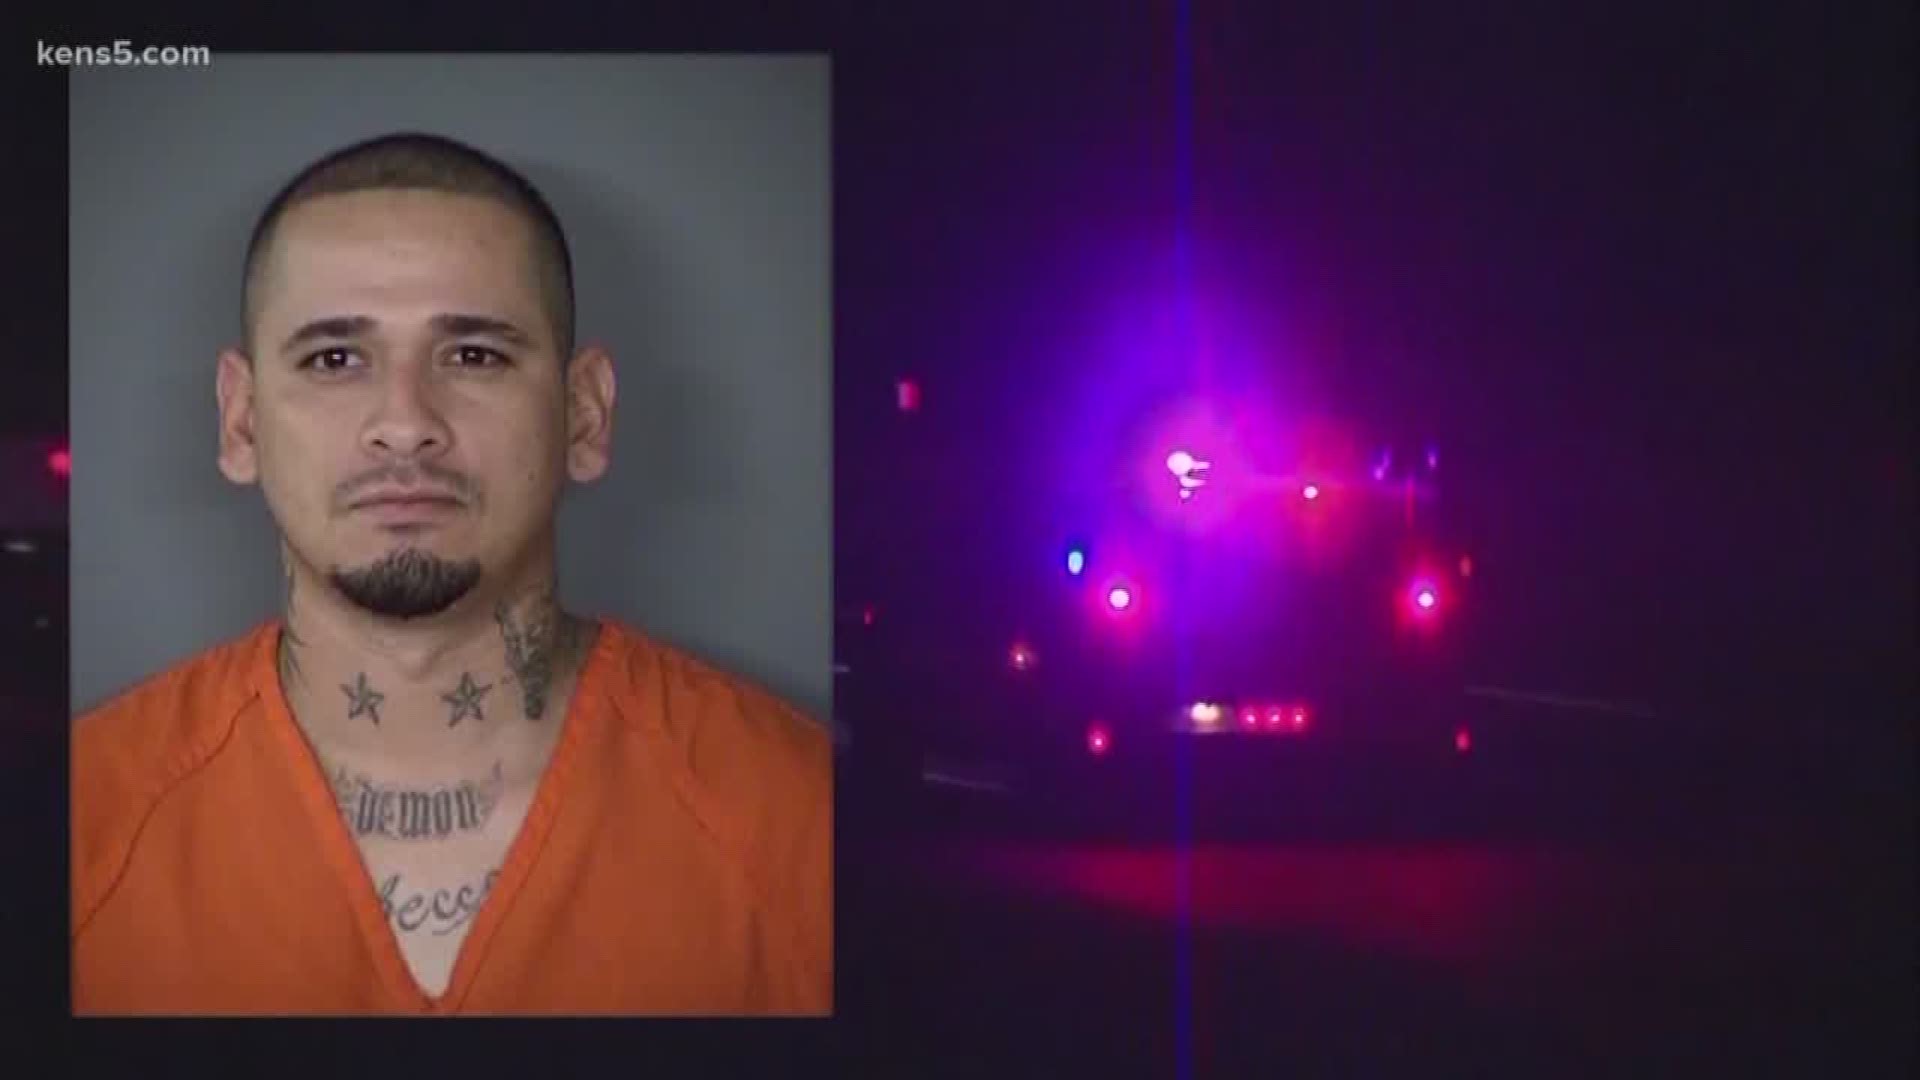 Shaun Ruiz Puente has been found guilty of capital murder for shooting and killing SAPD Officer Bobby Deckard in December of 2013.